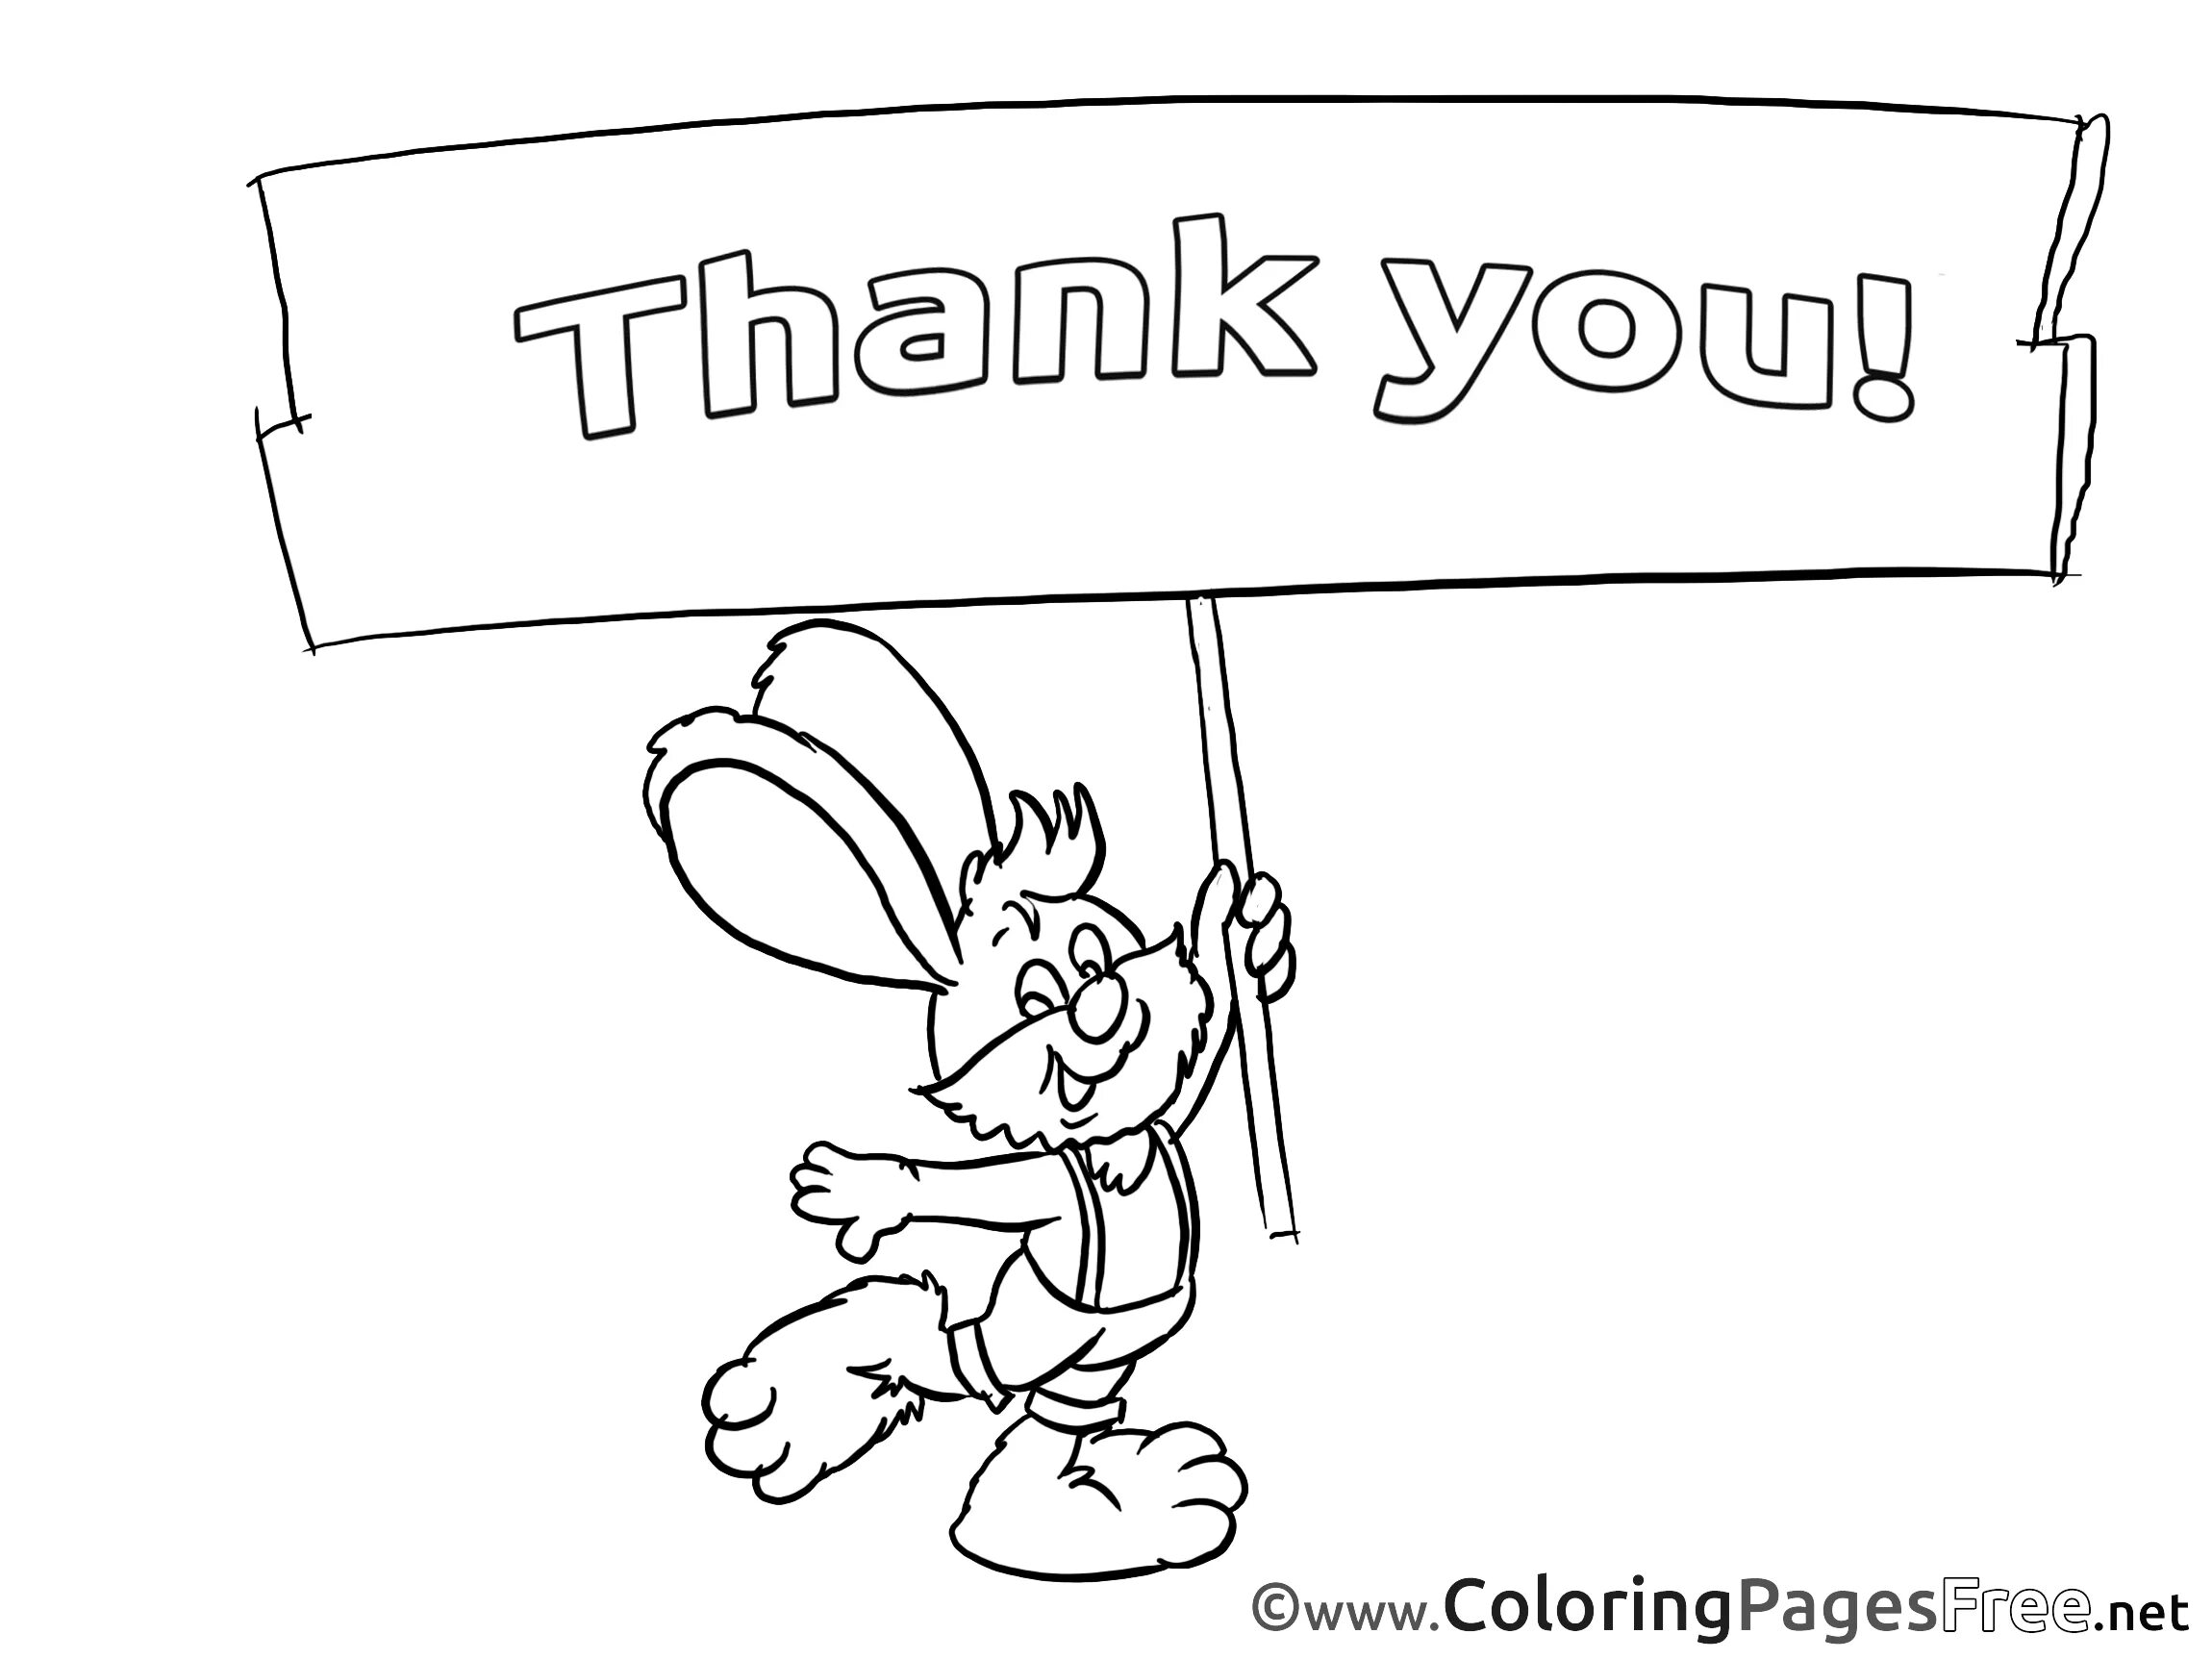 Color-lively thank you coloring book for kids